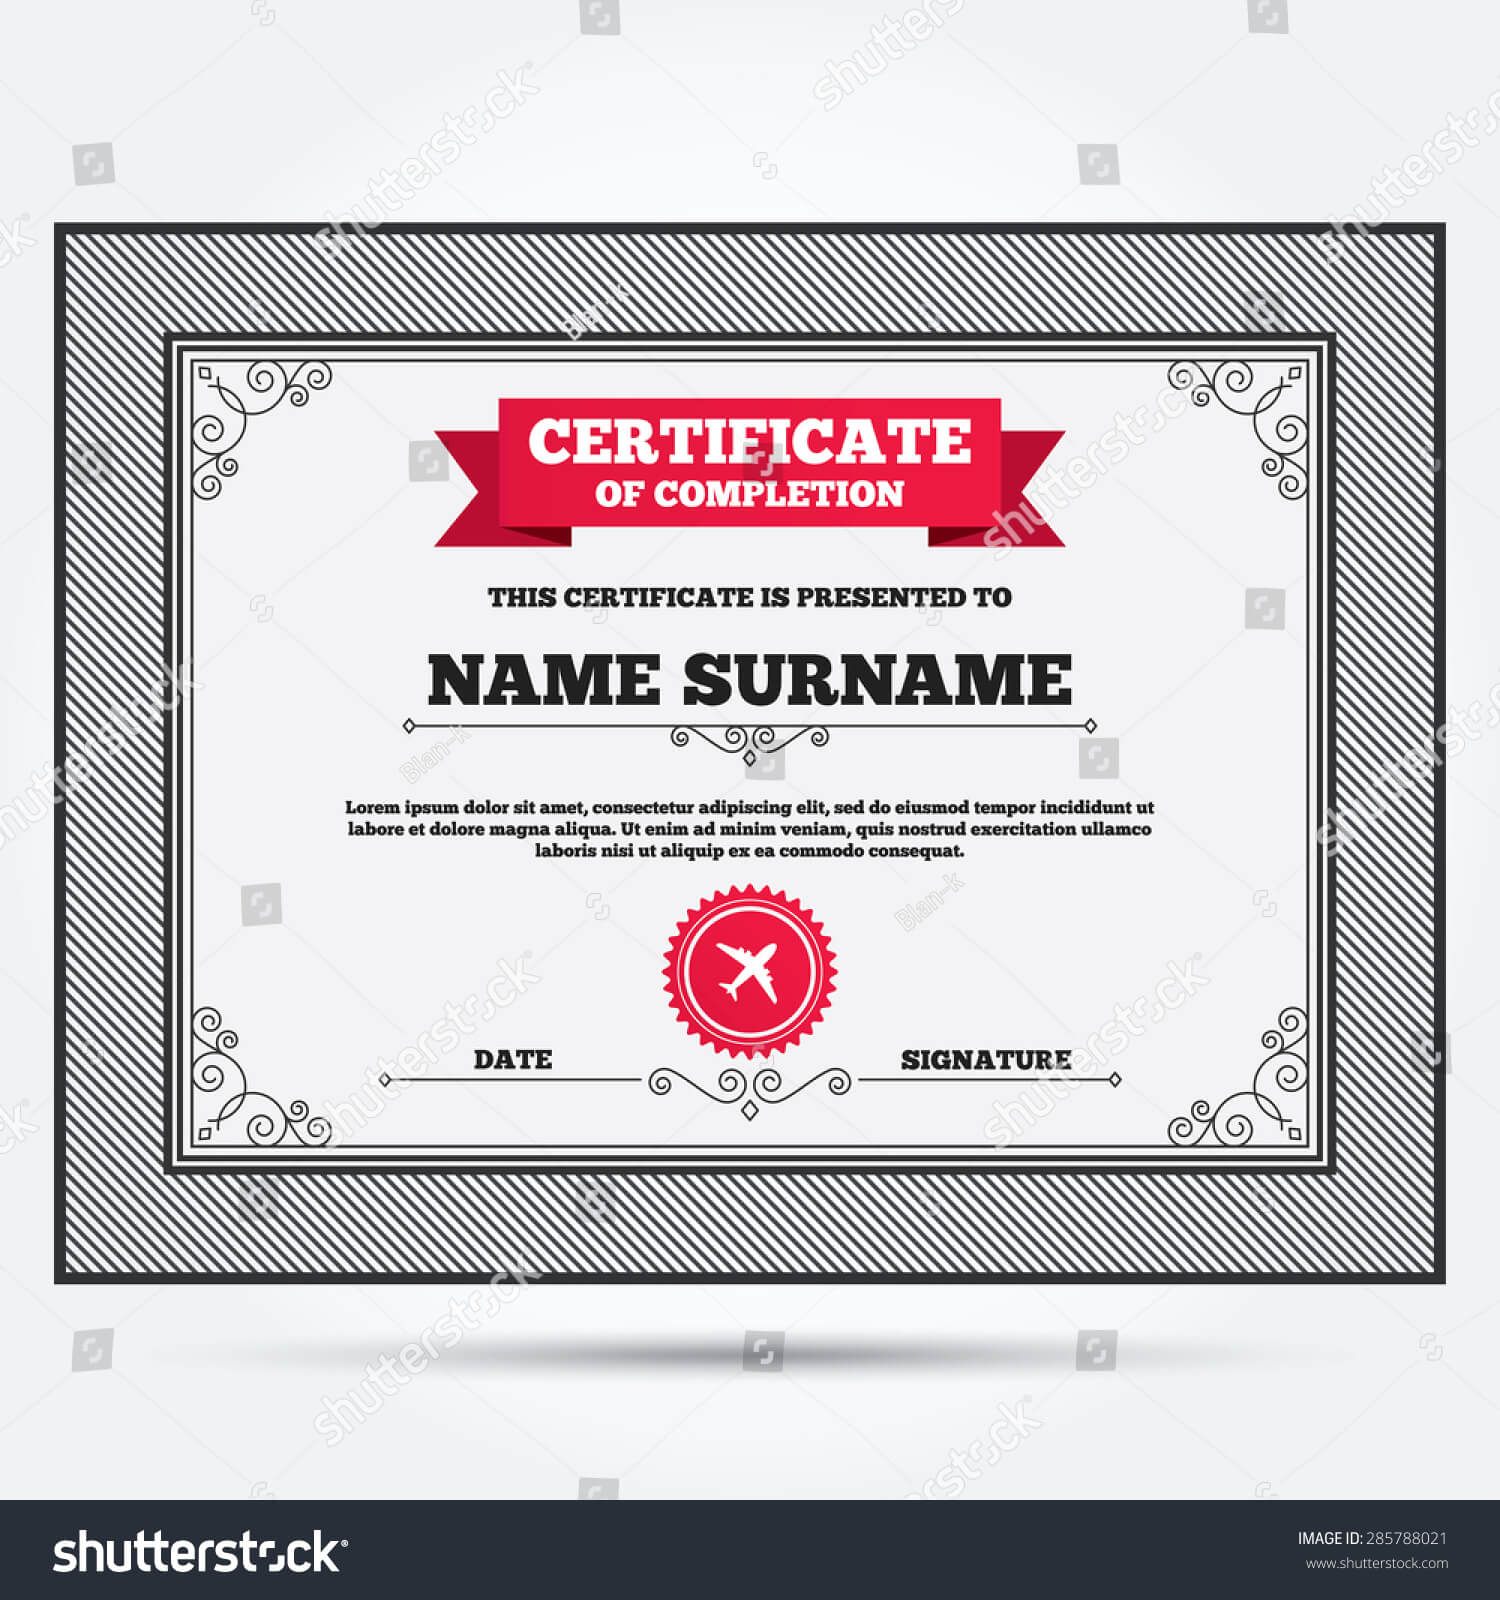 Certificates Of Completion Template ] – Best 20 Award For Sales Certificate Template